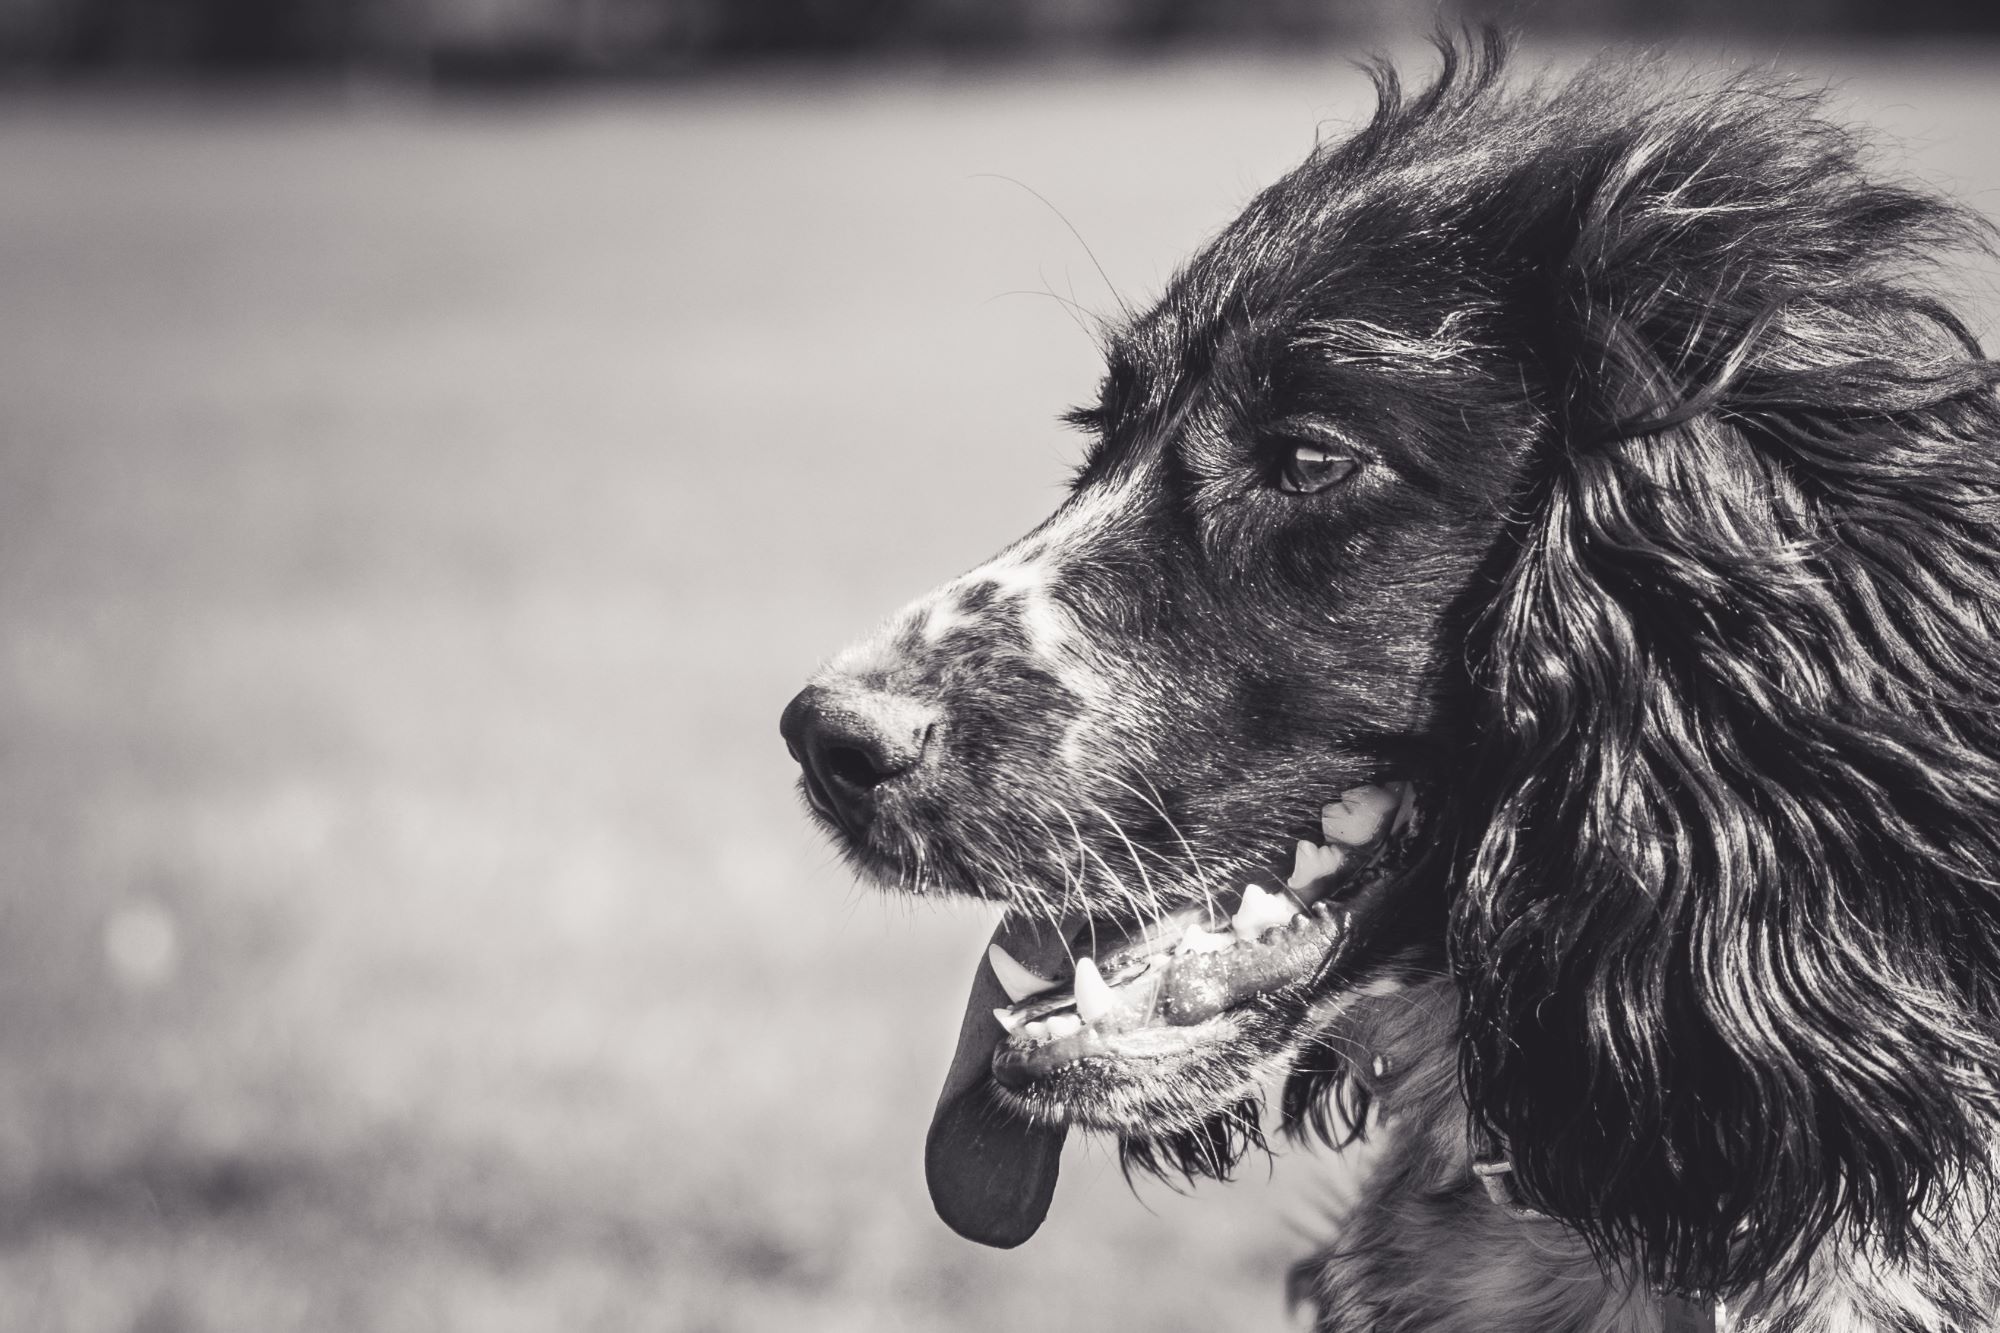 A close up of a spaniel who's got her tongue hanging out the right side of her mouth.